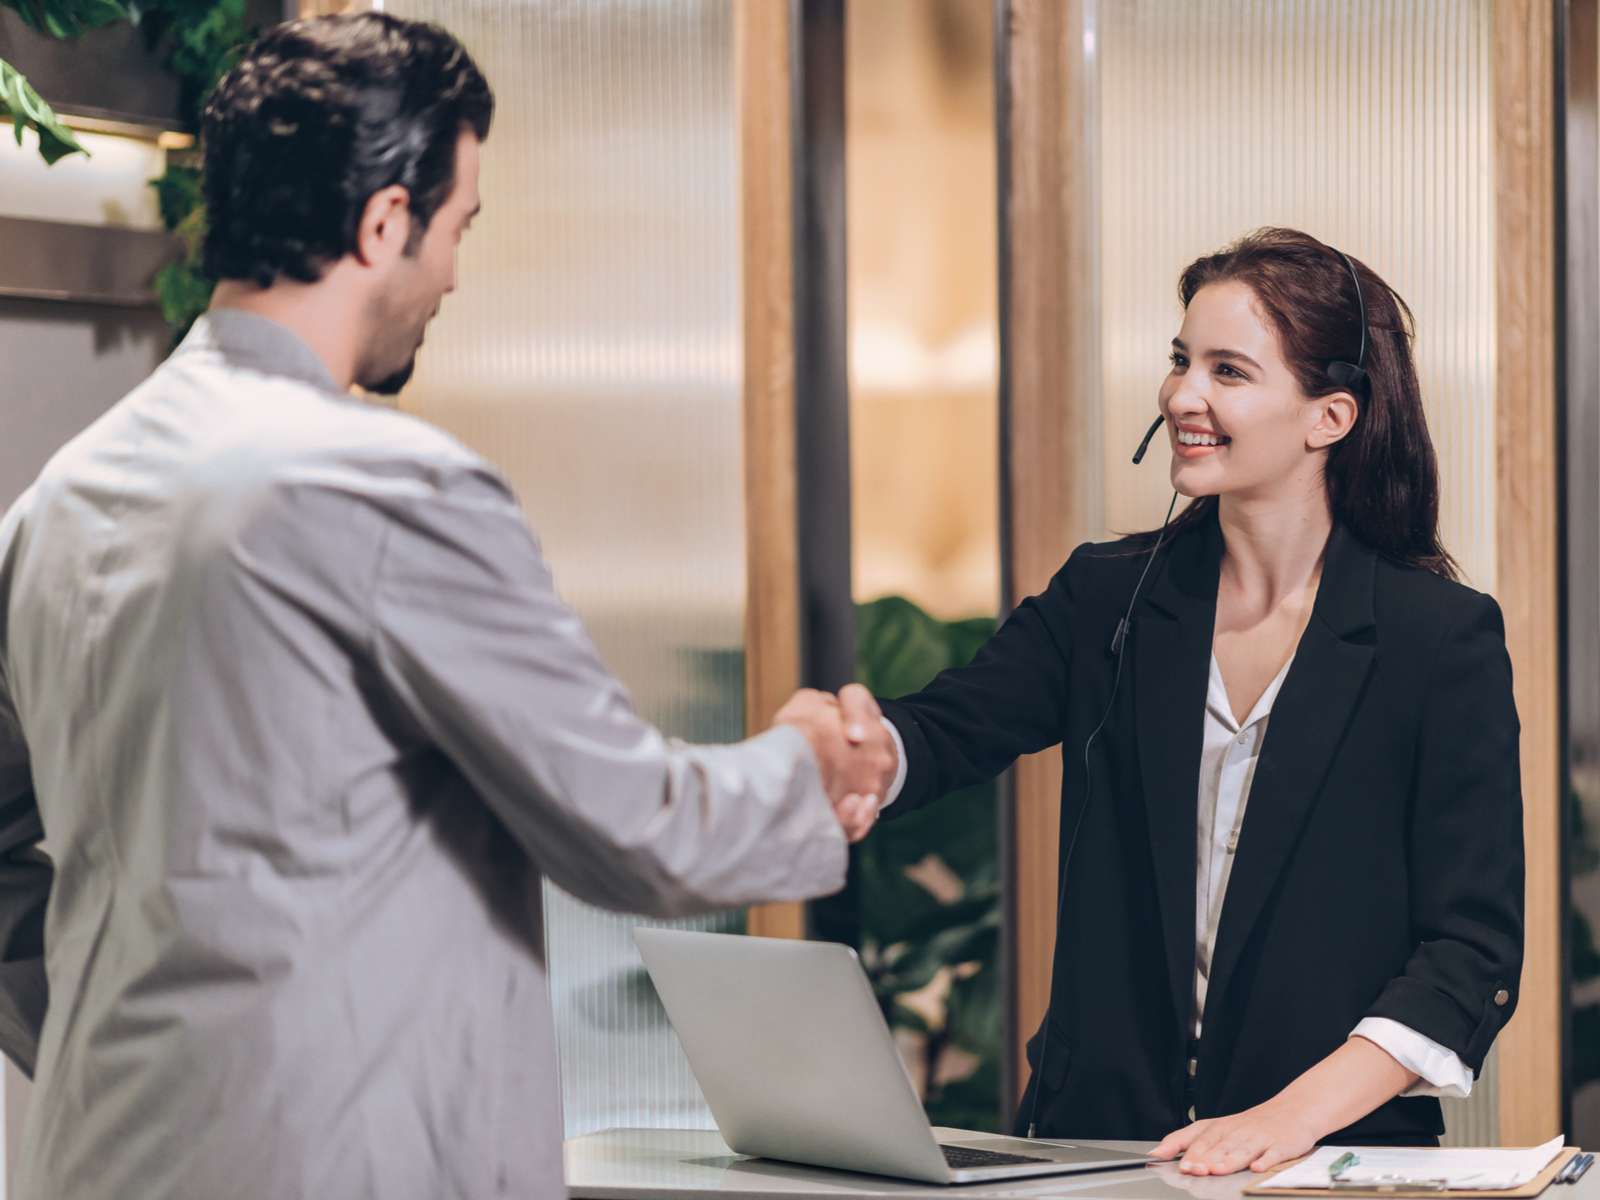 Female_receptionist_shaking_hands_with_male_visitor